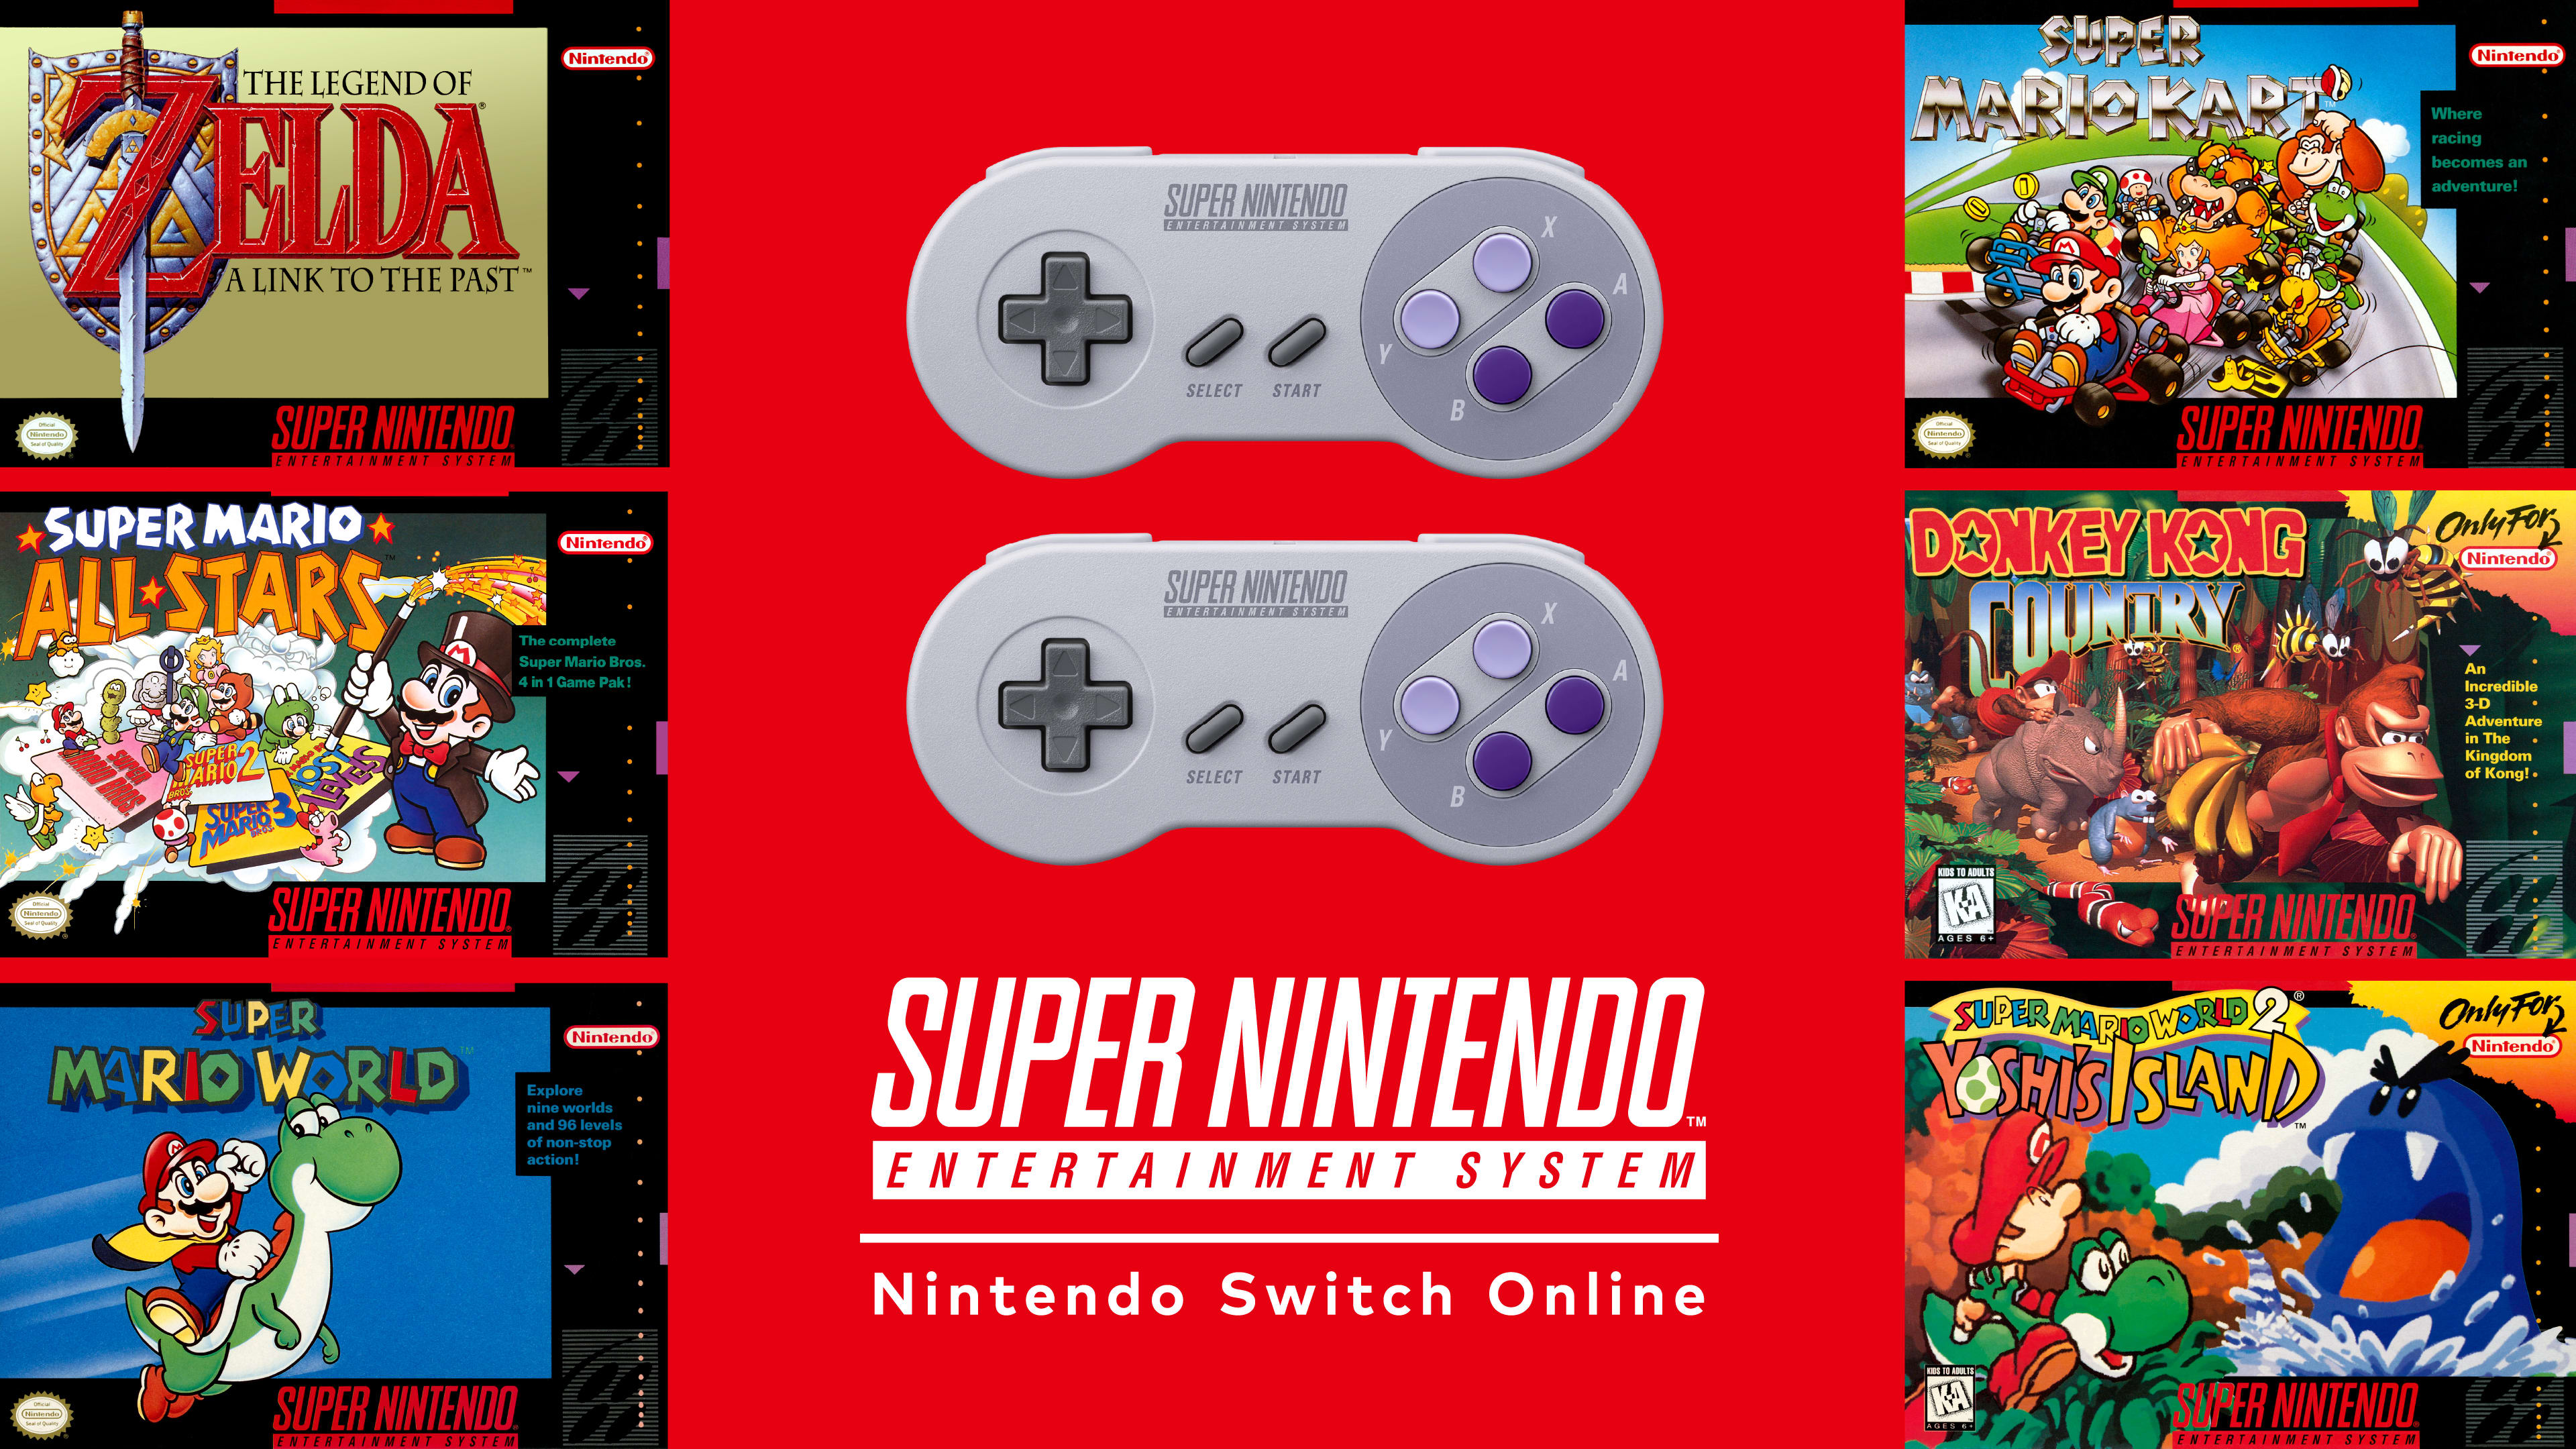 Super Nintendo Entertainment System controllers image with  SNES - Nintendo Switch Online logo